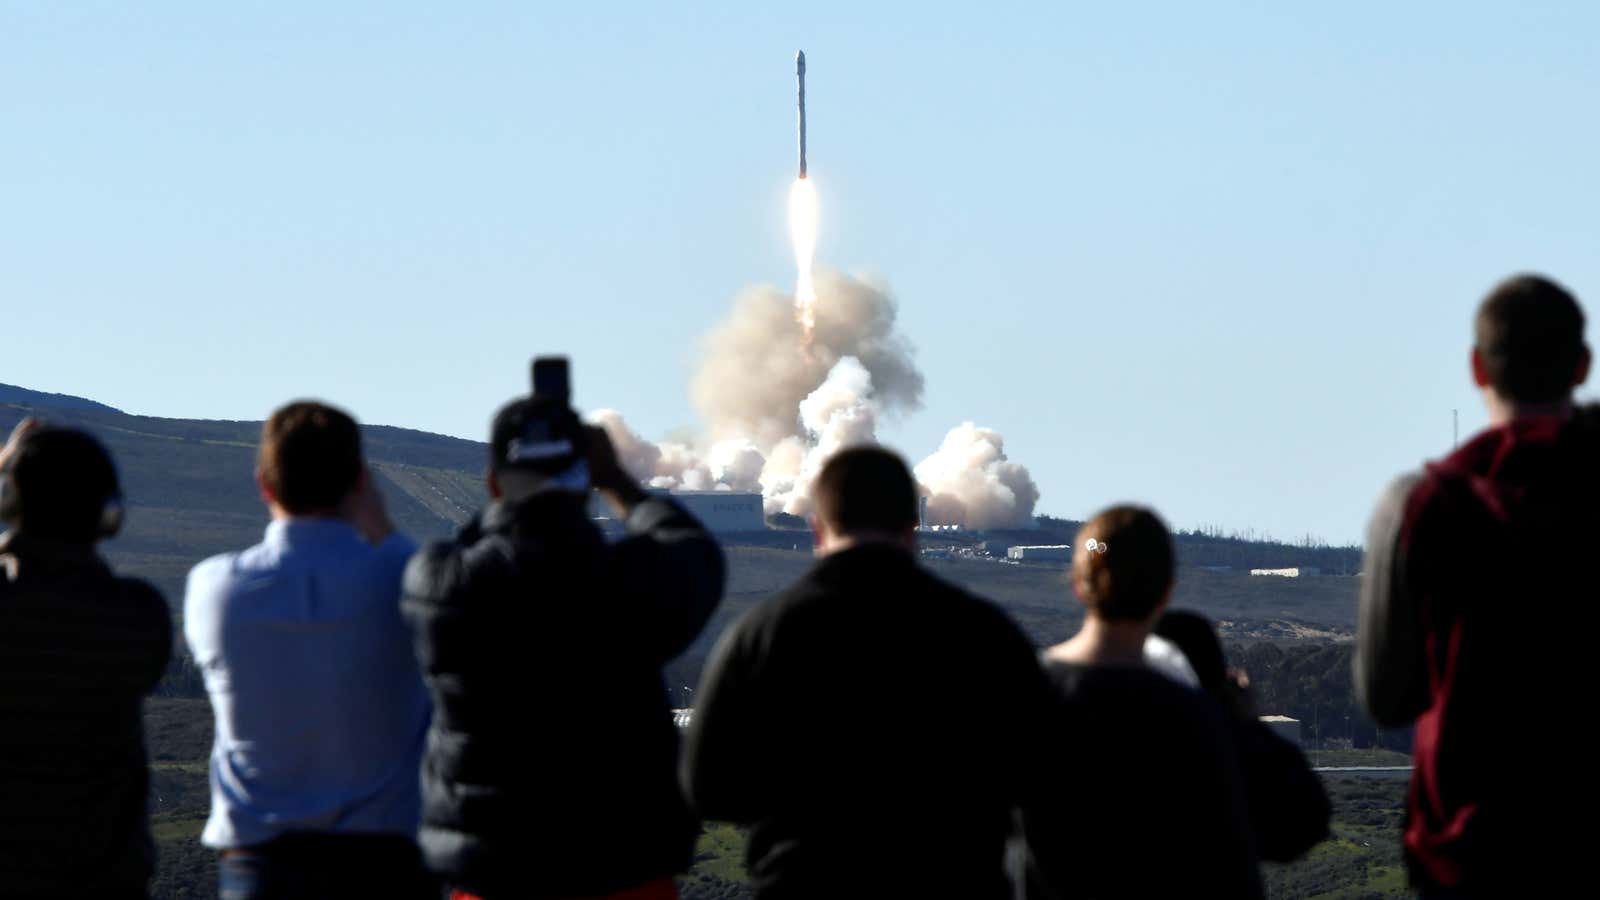 A SpaceX rocket lifts off from the California coast in Jan. 2017.